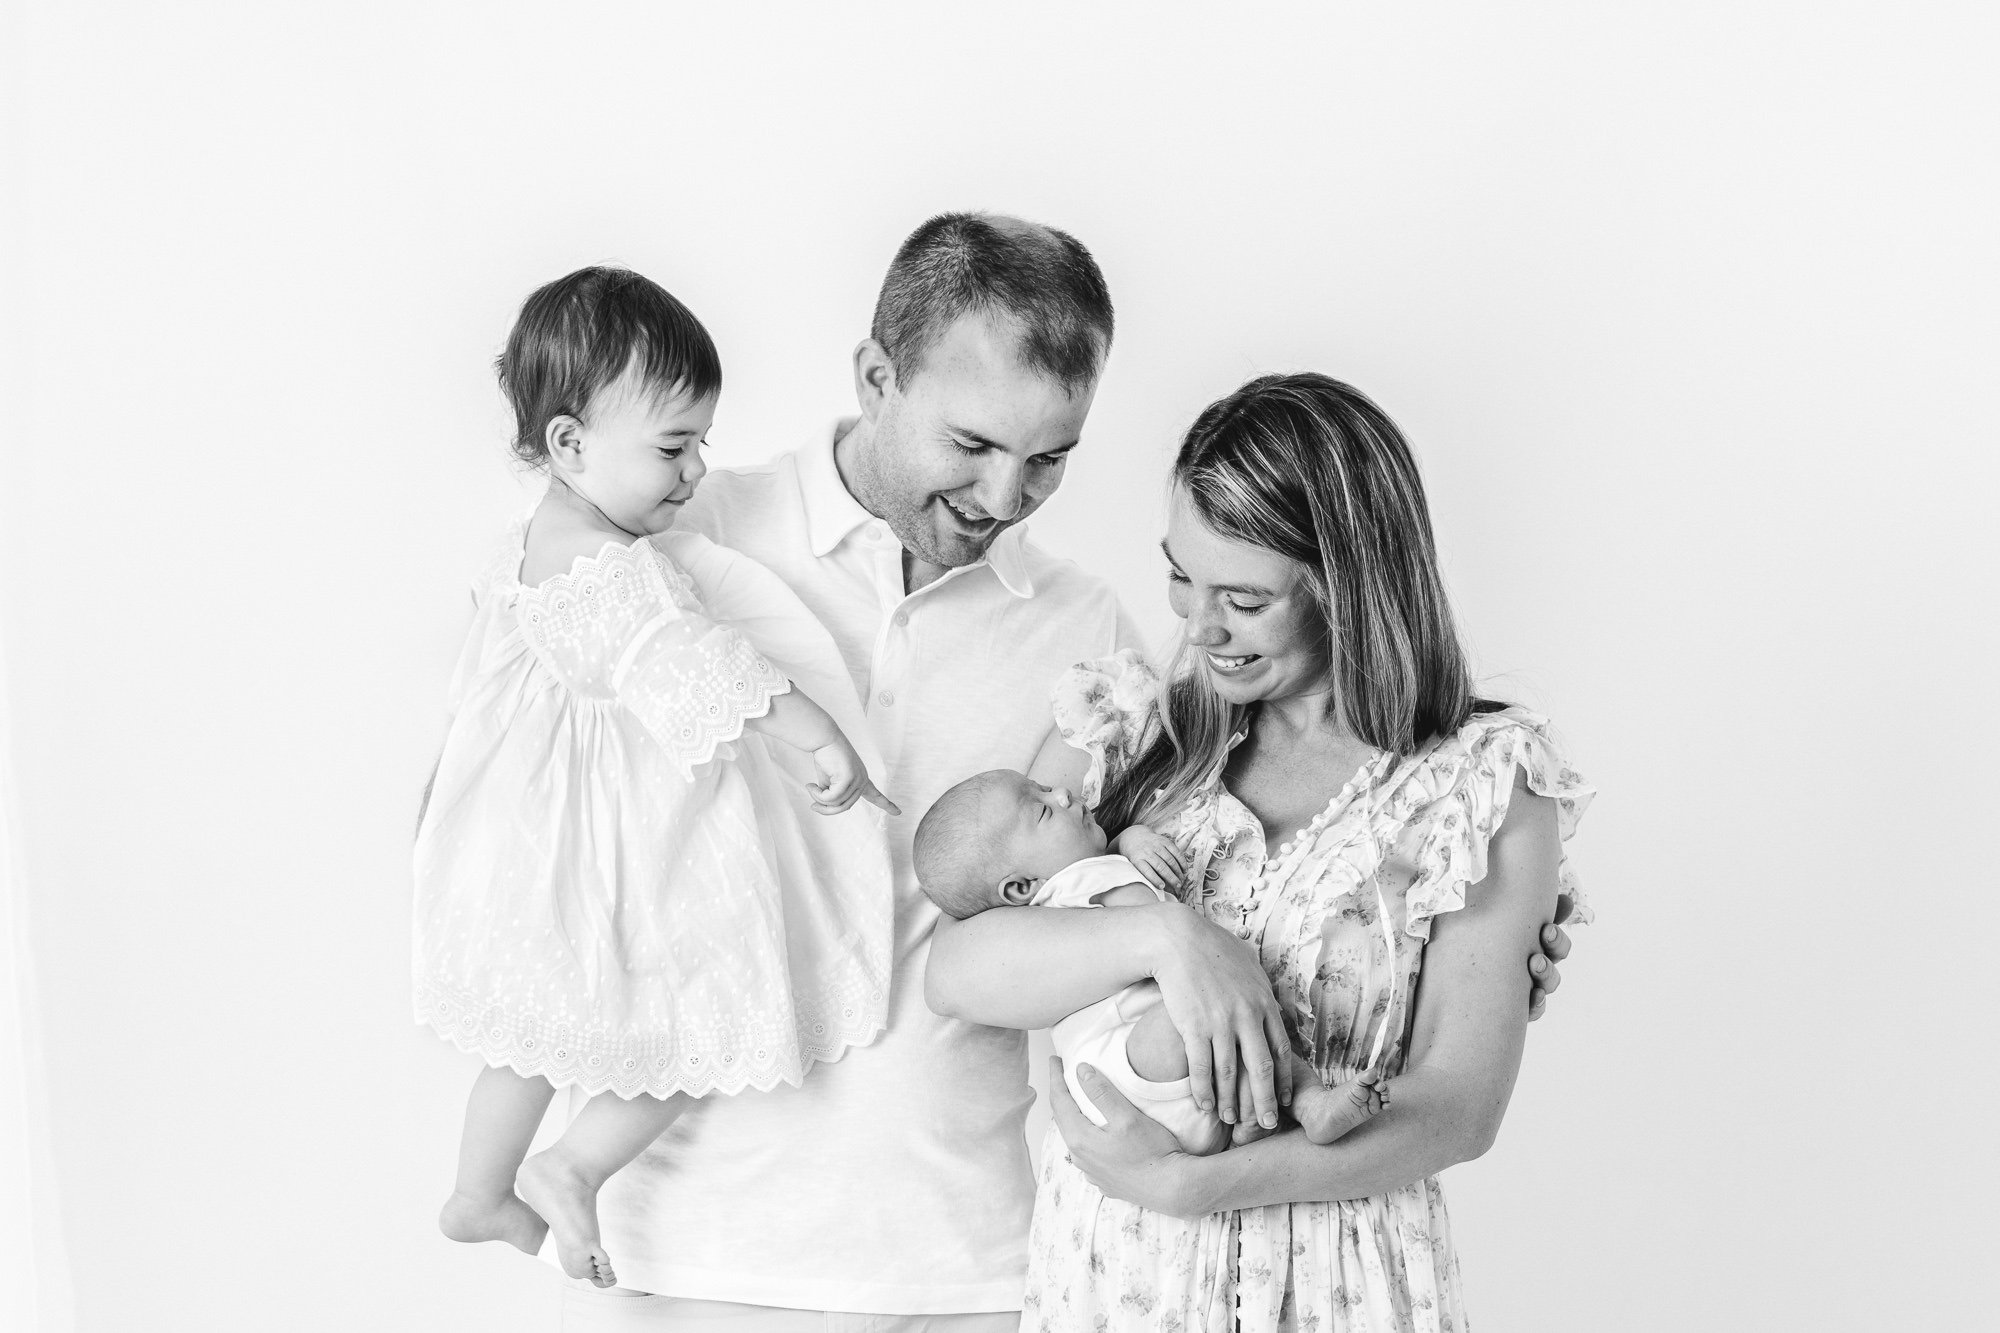 It is so fulfilling to get to know and photograph families who are obsessed with their kids. Whether your kids are new to the world or quickly growing taller than you, it is so special to document your unique love and bonds.